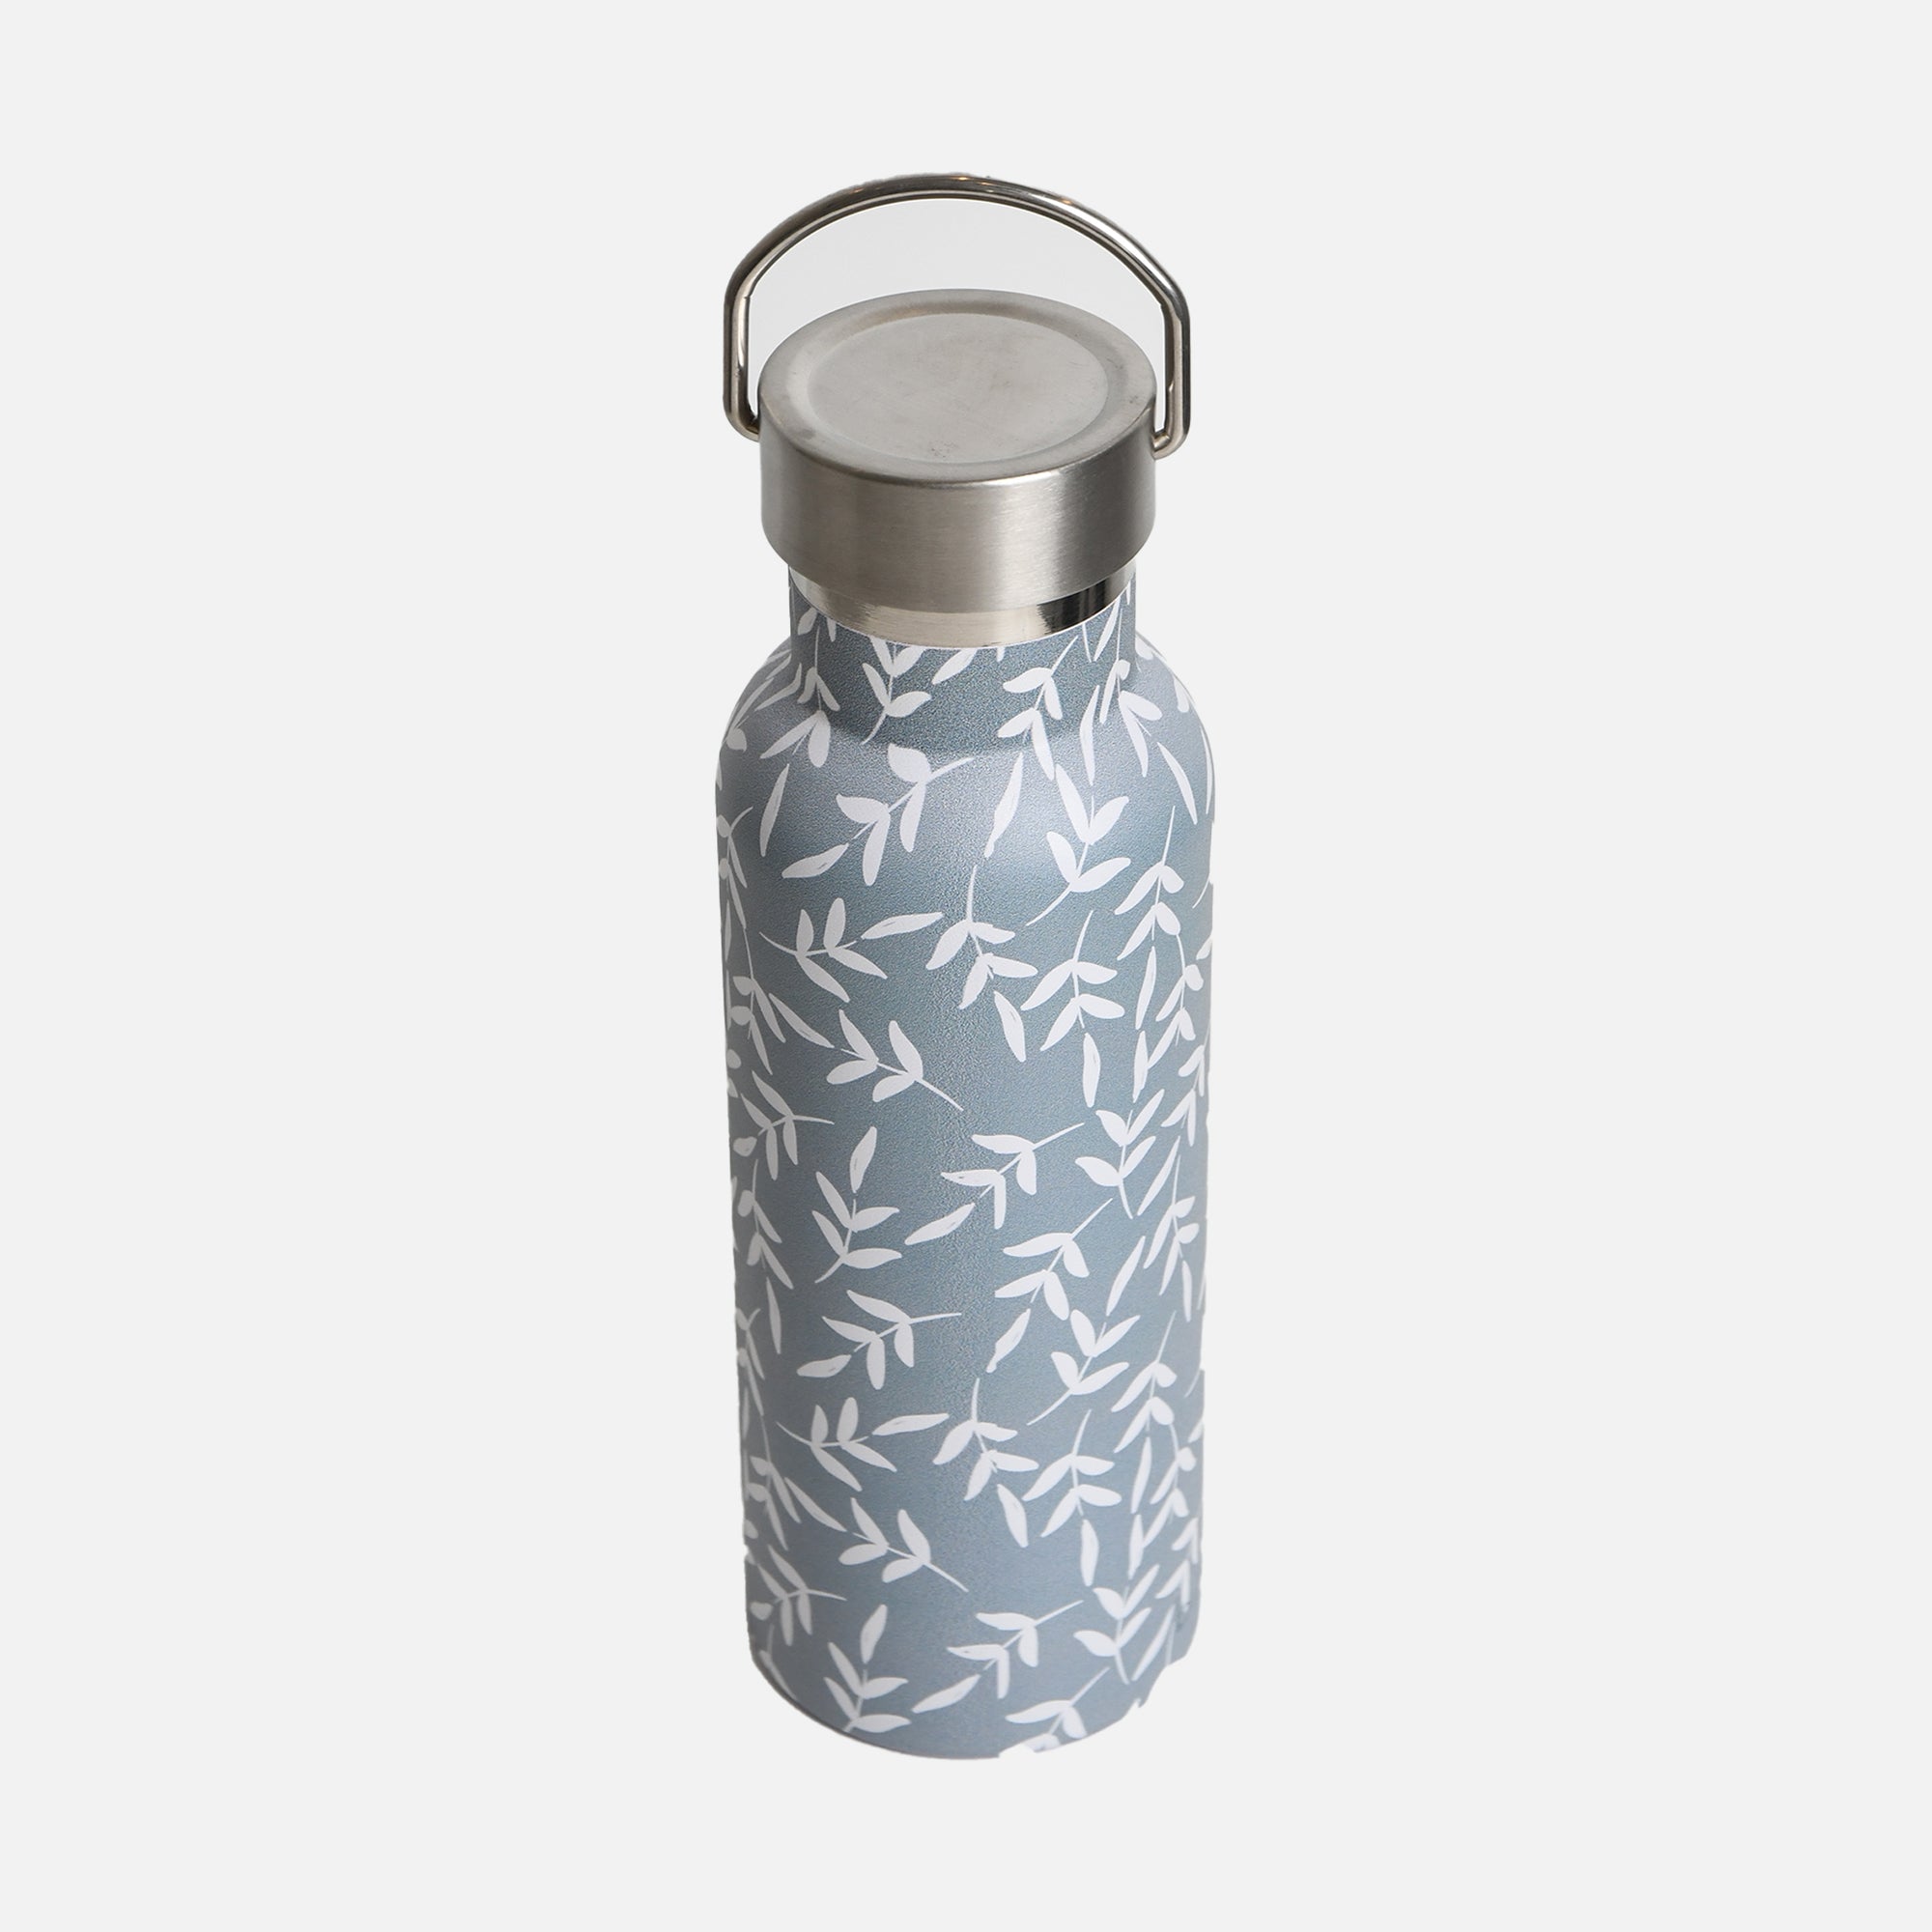 Stainless steel water bottle with leaf pattern